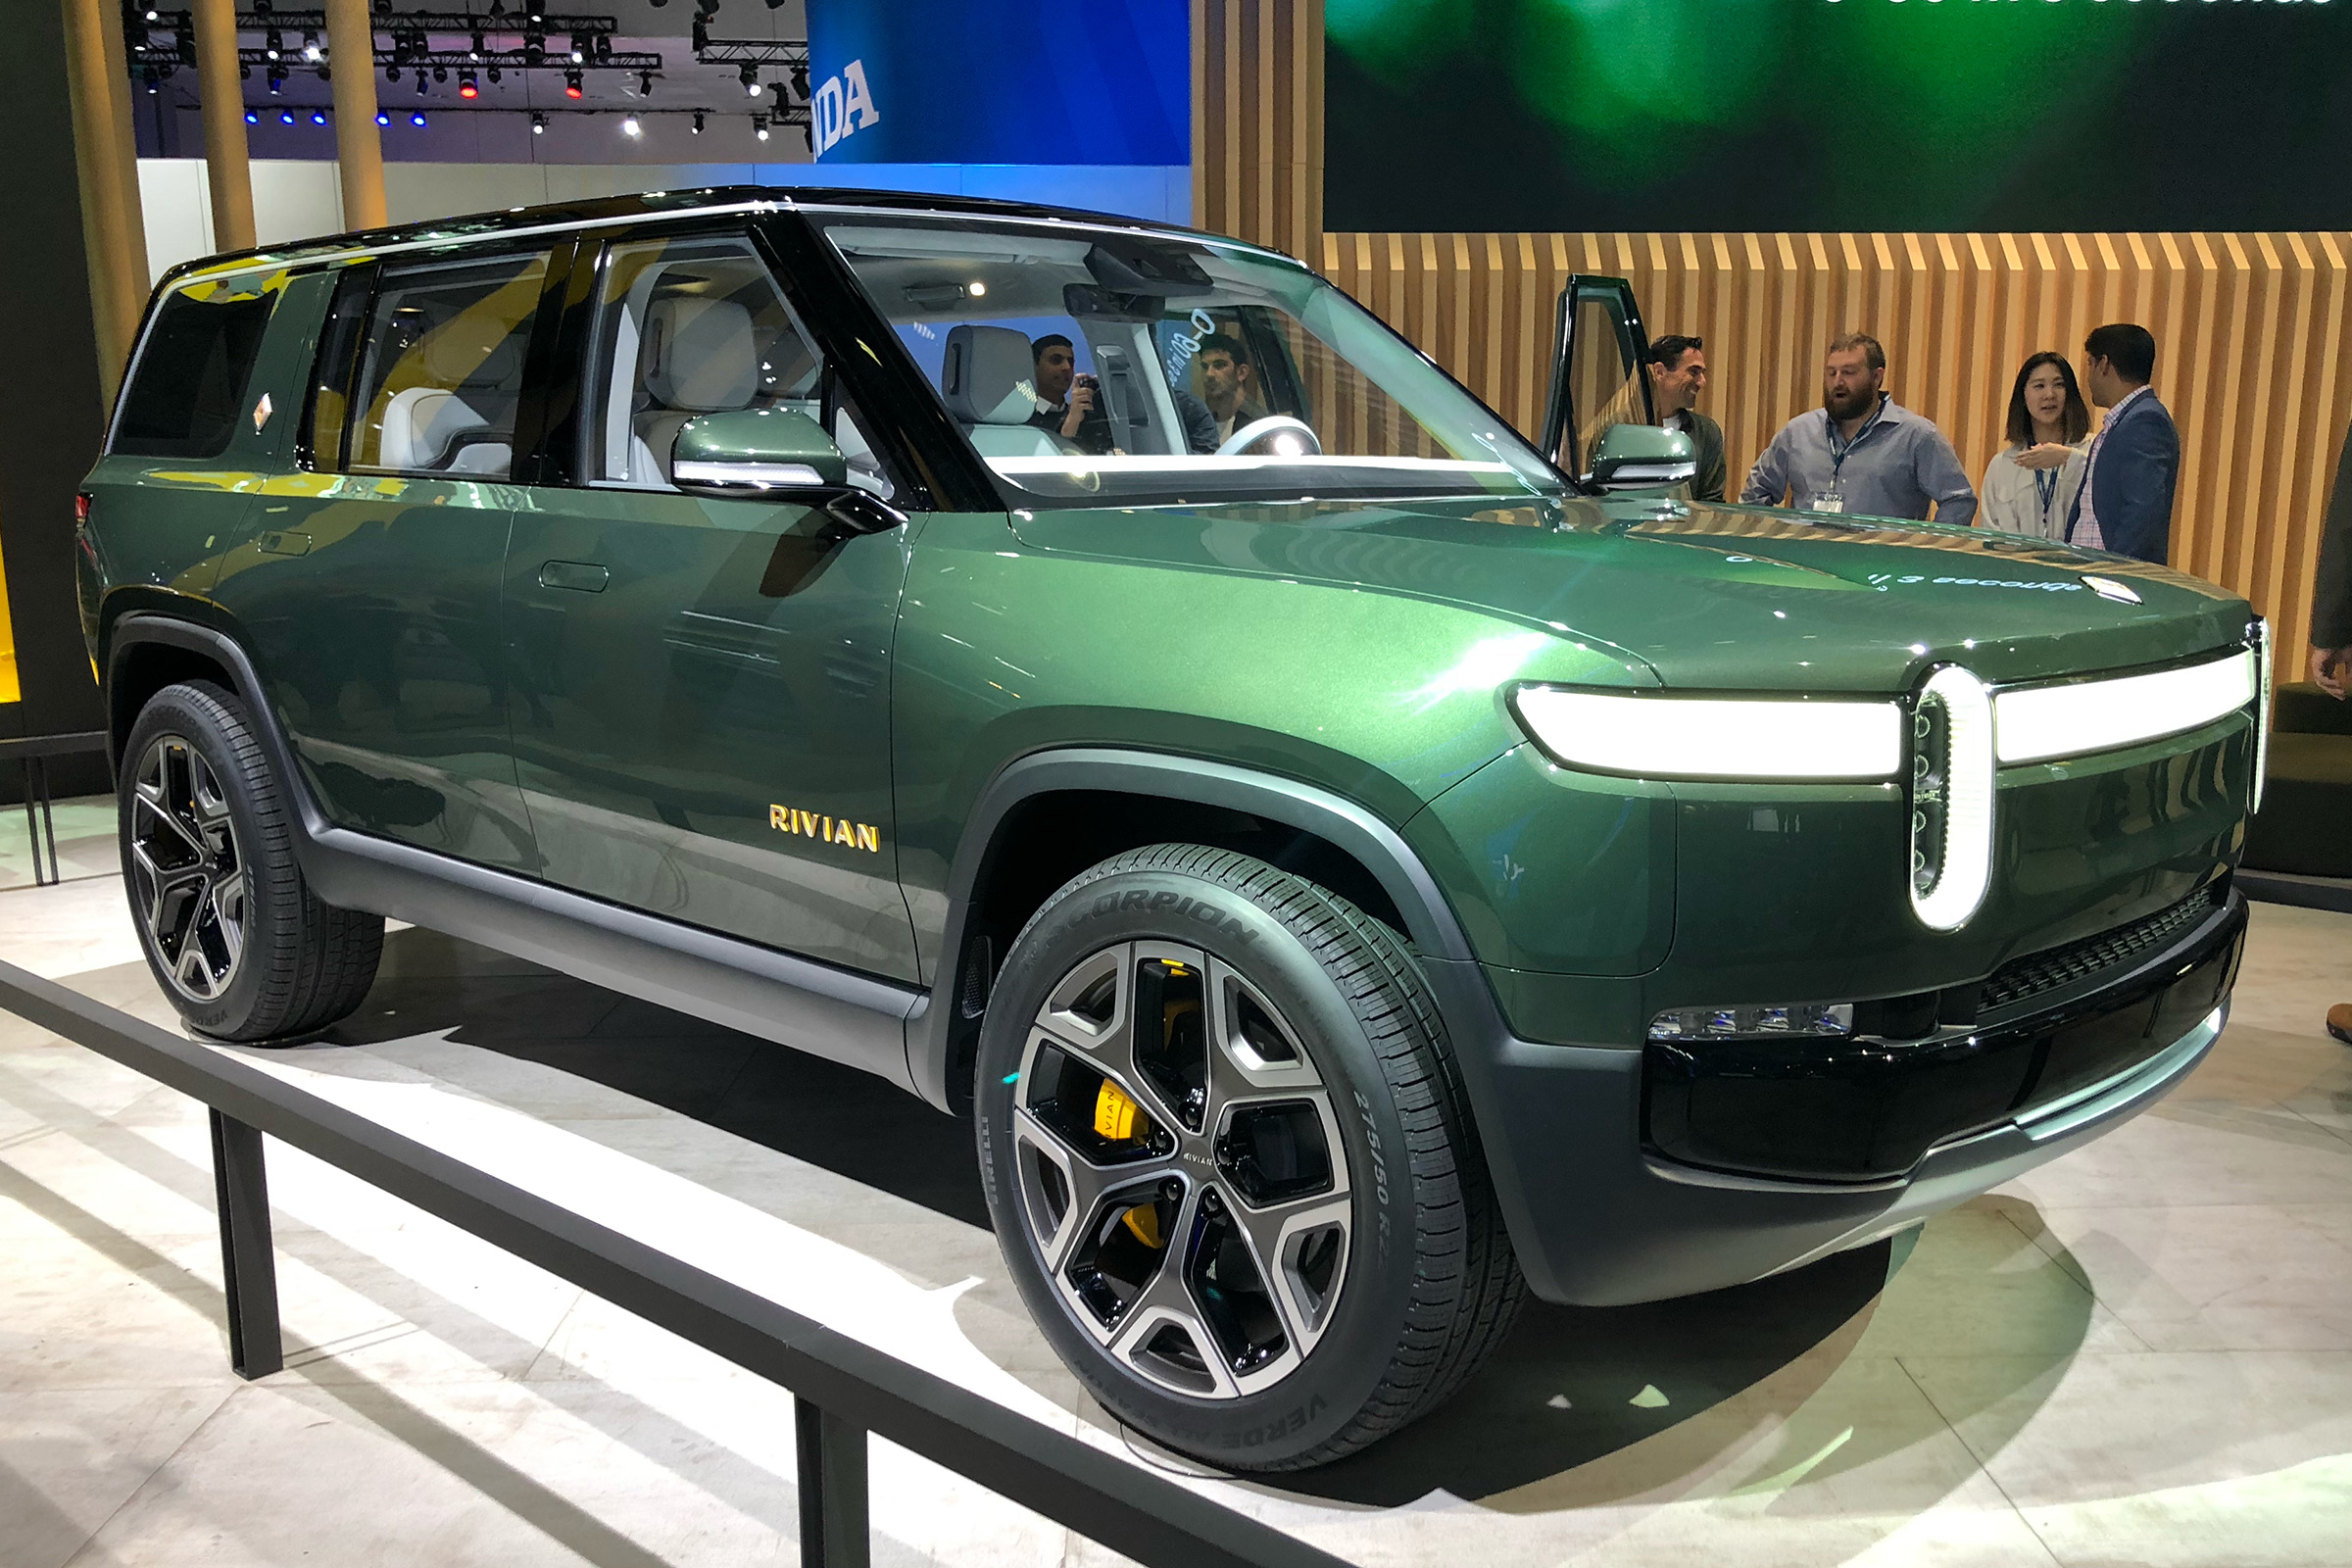 Rivian R1S electric SUV launched in LA Auto Express